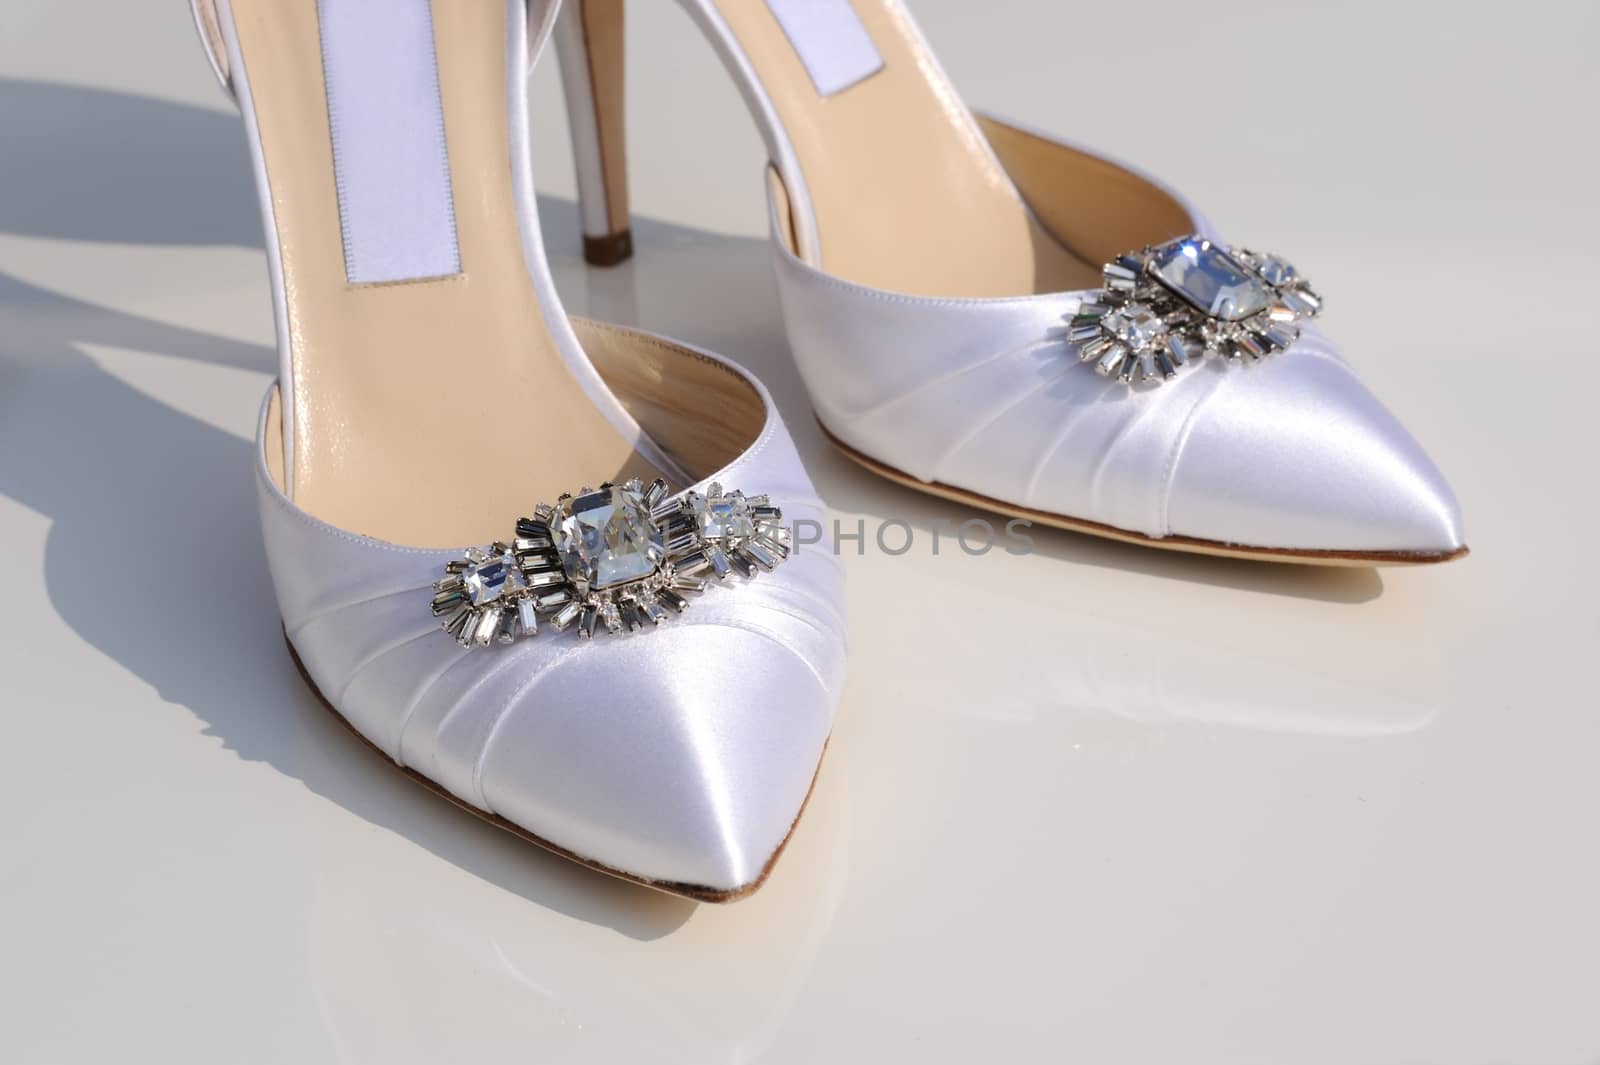 Brides shoe details by kmwphotography